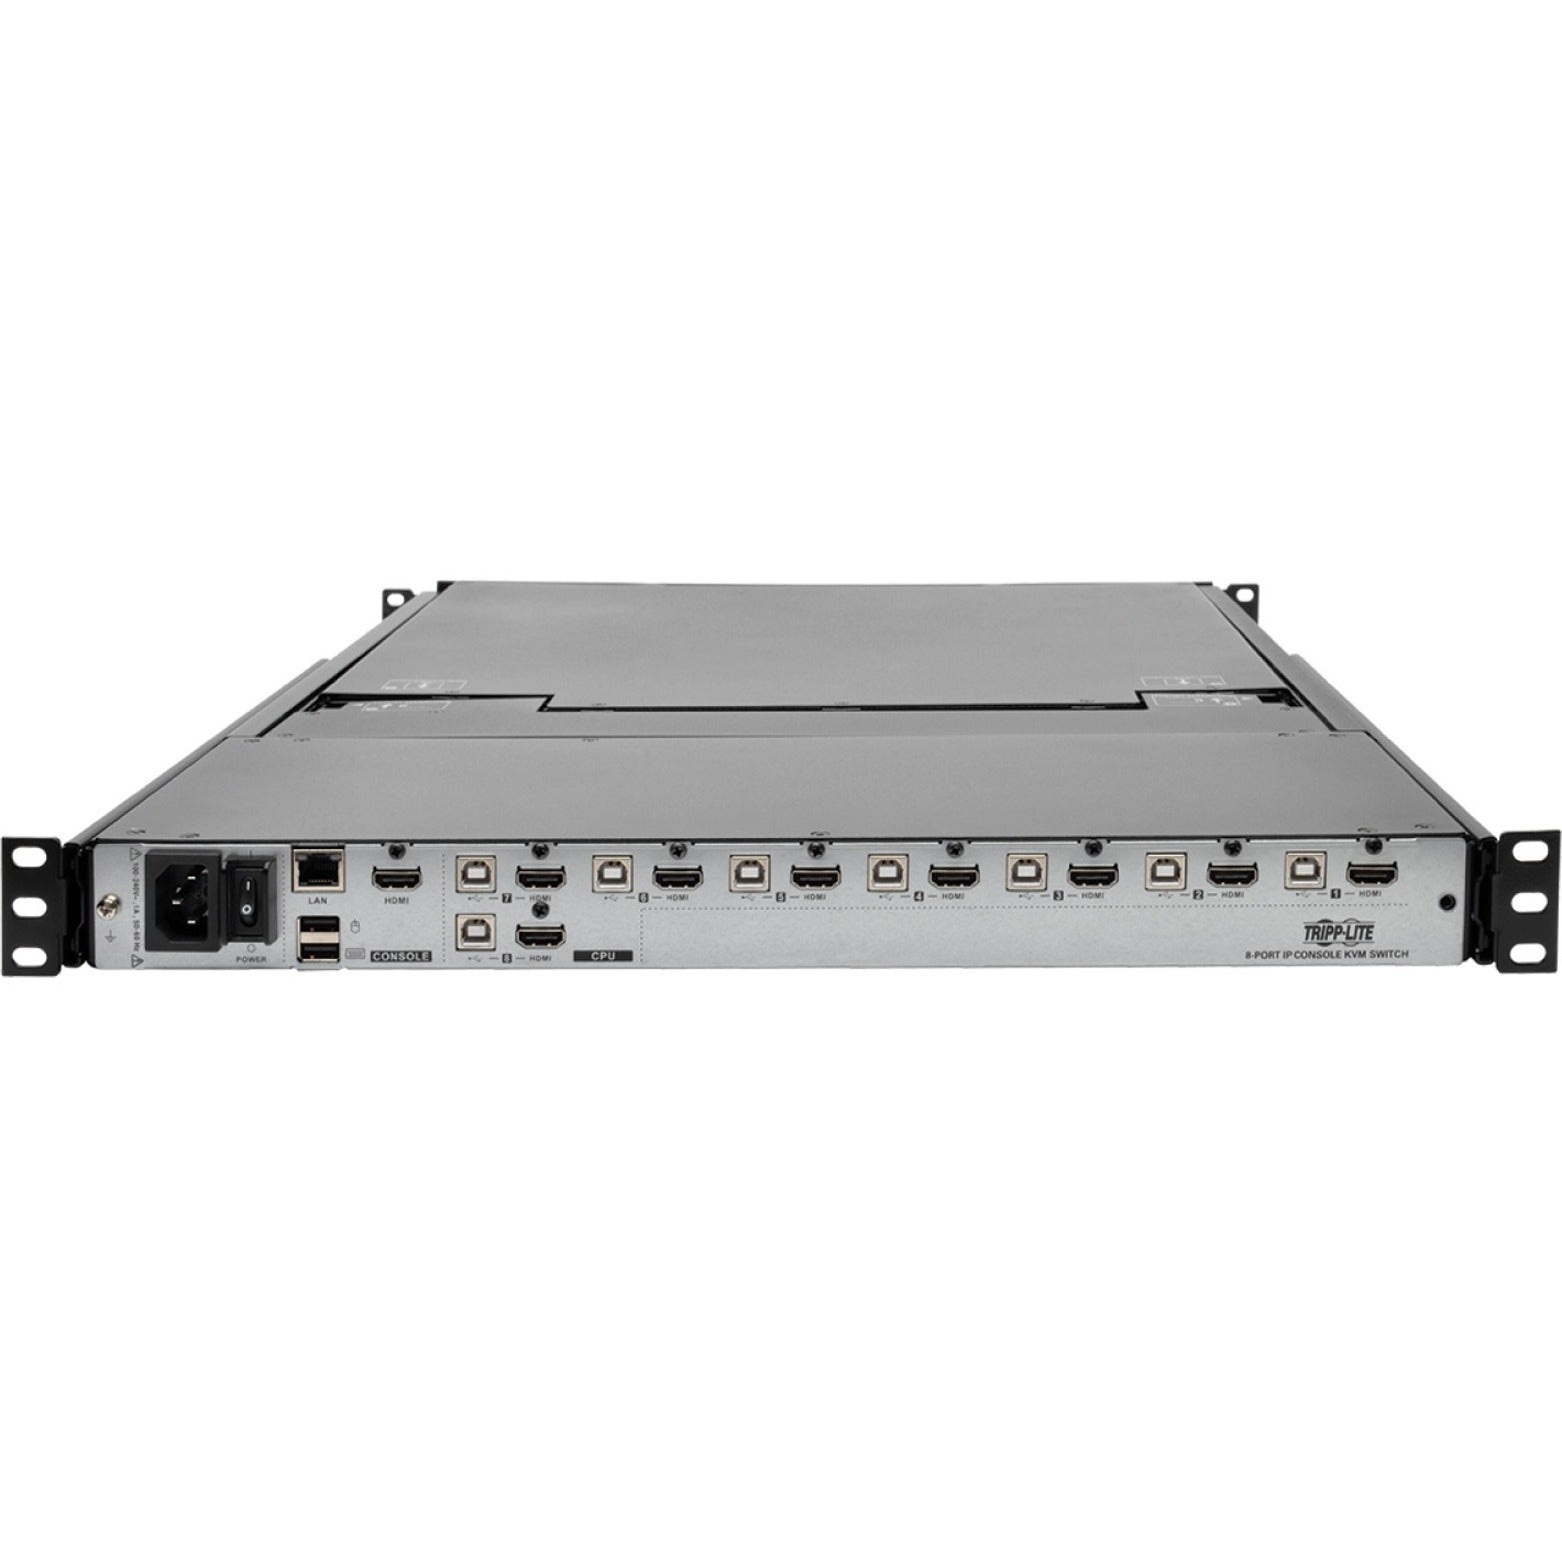 Tripp Lite B030-008-17-IP NetDirector 8-Port 1U Rack-Mount Console HDMI KVM Switch with 17 in. LCD and IP, Full HD, TouchPad, TAA Compliant